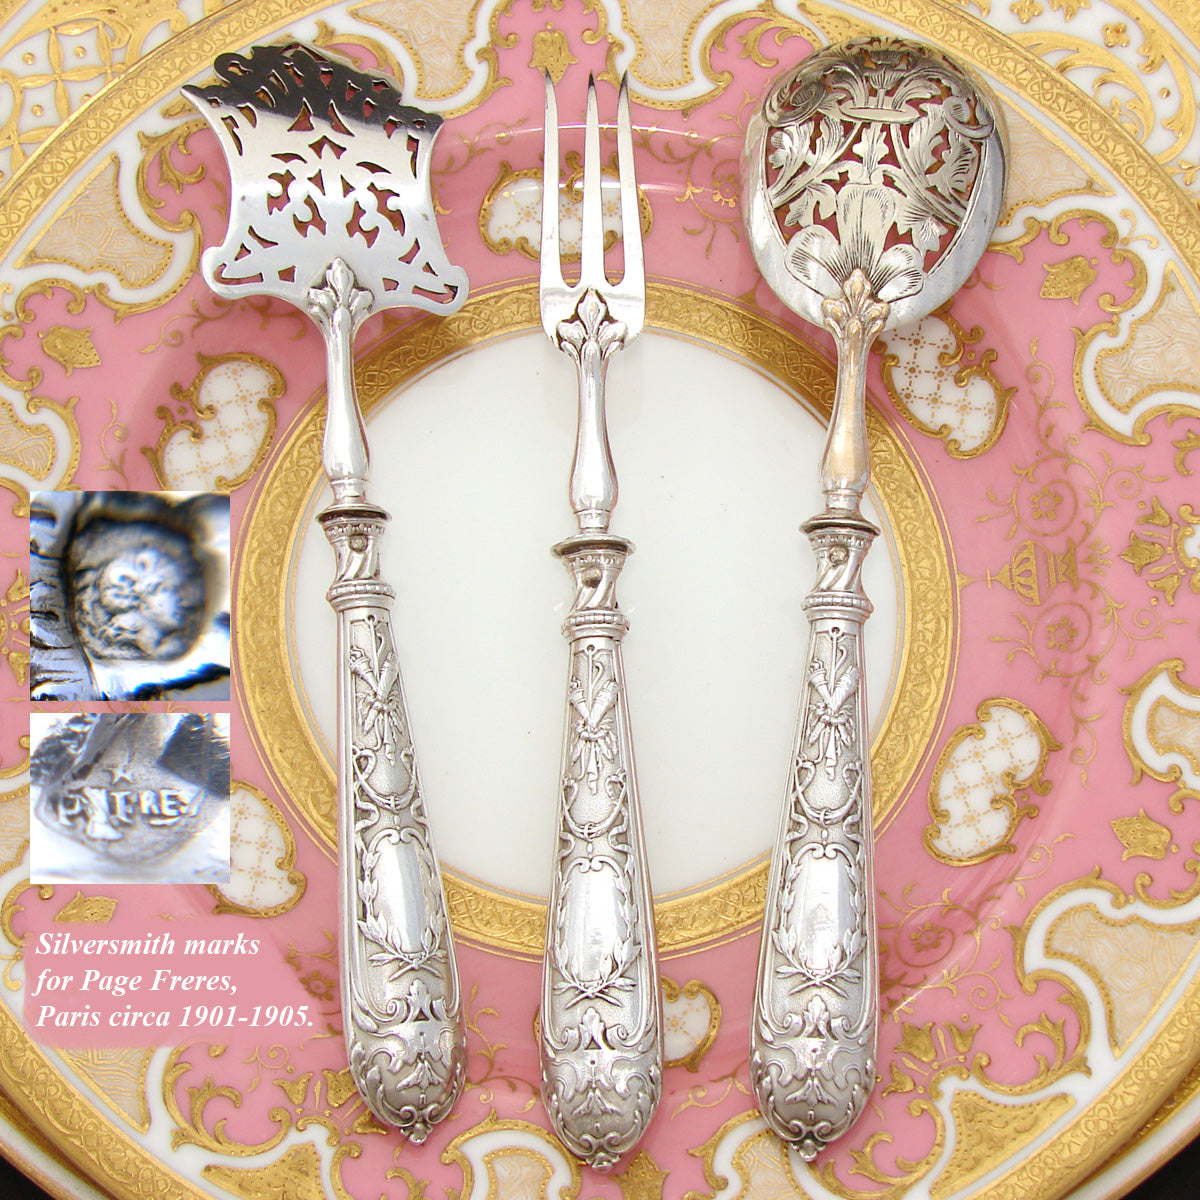 Antique French Sterling Silver 3pc Condiment or Hors D'Oeuvre Set, Empire Revival Crossed Toch & Quiver